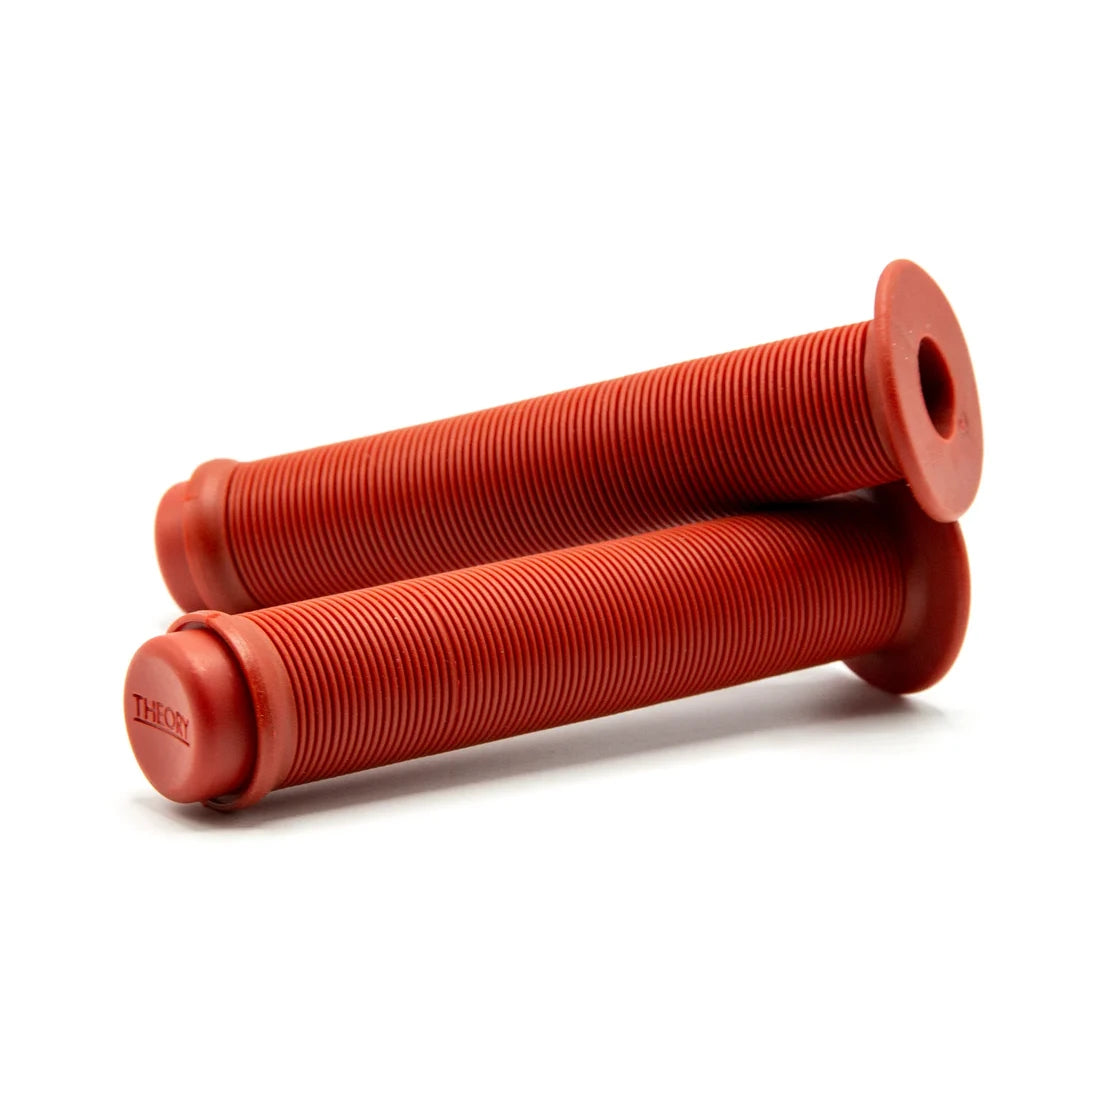 Theory Data Grips w/ Bar Ends - Flanged - Red